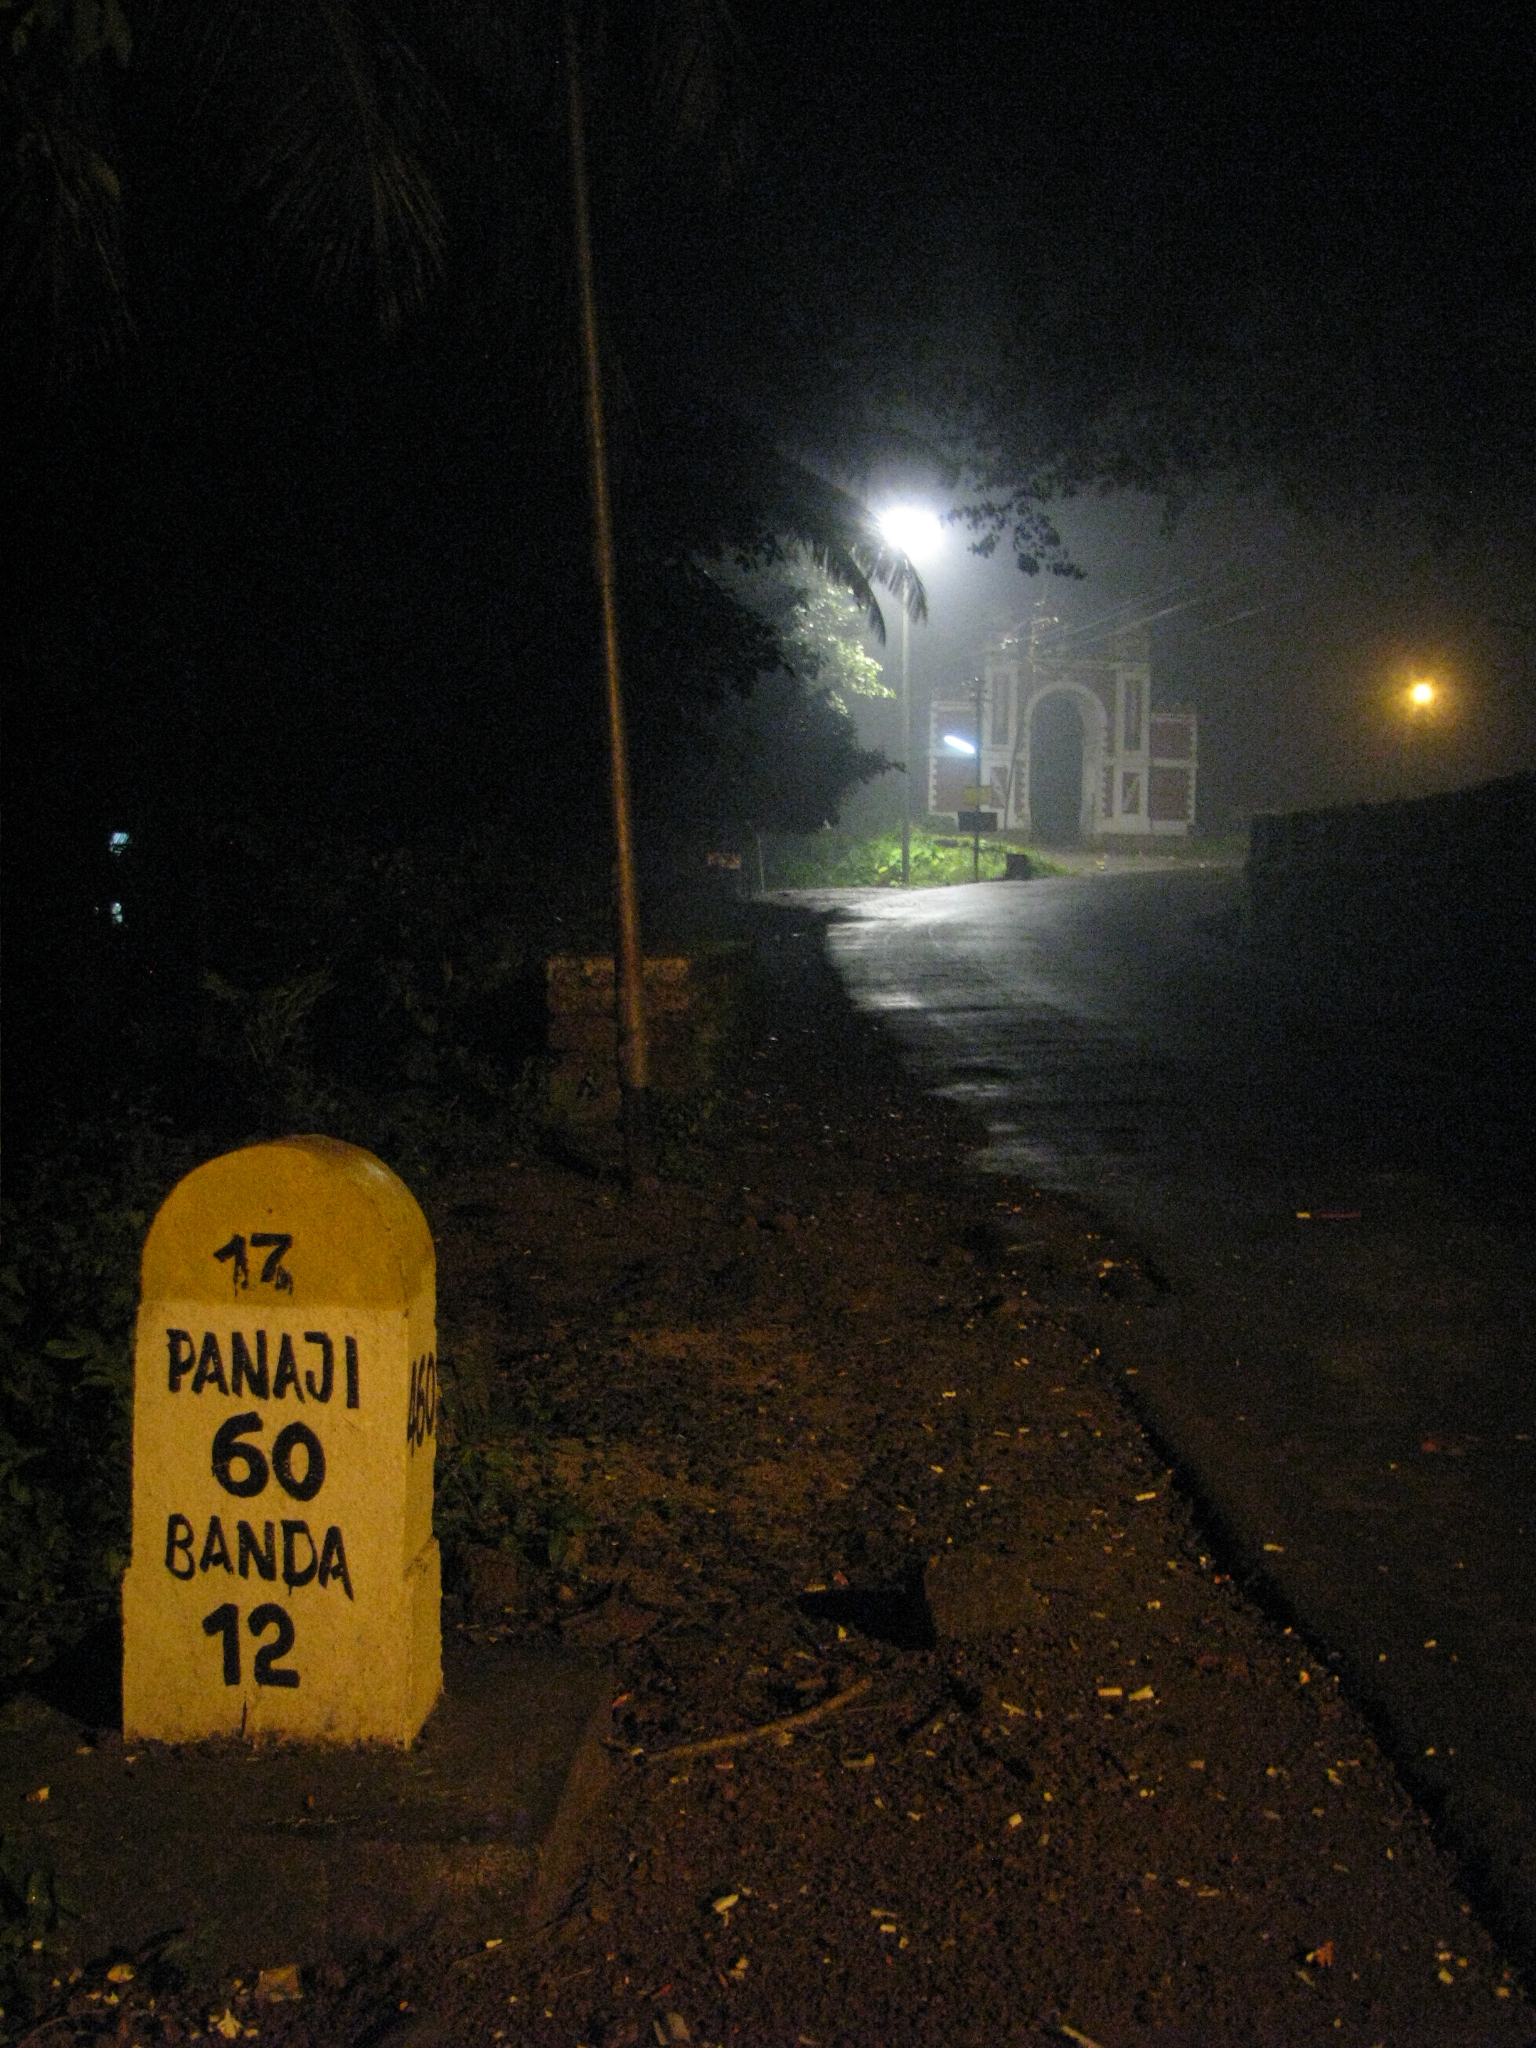 the street signs are yellow and black on the dark road